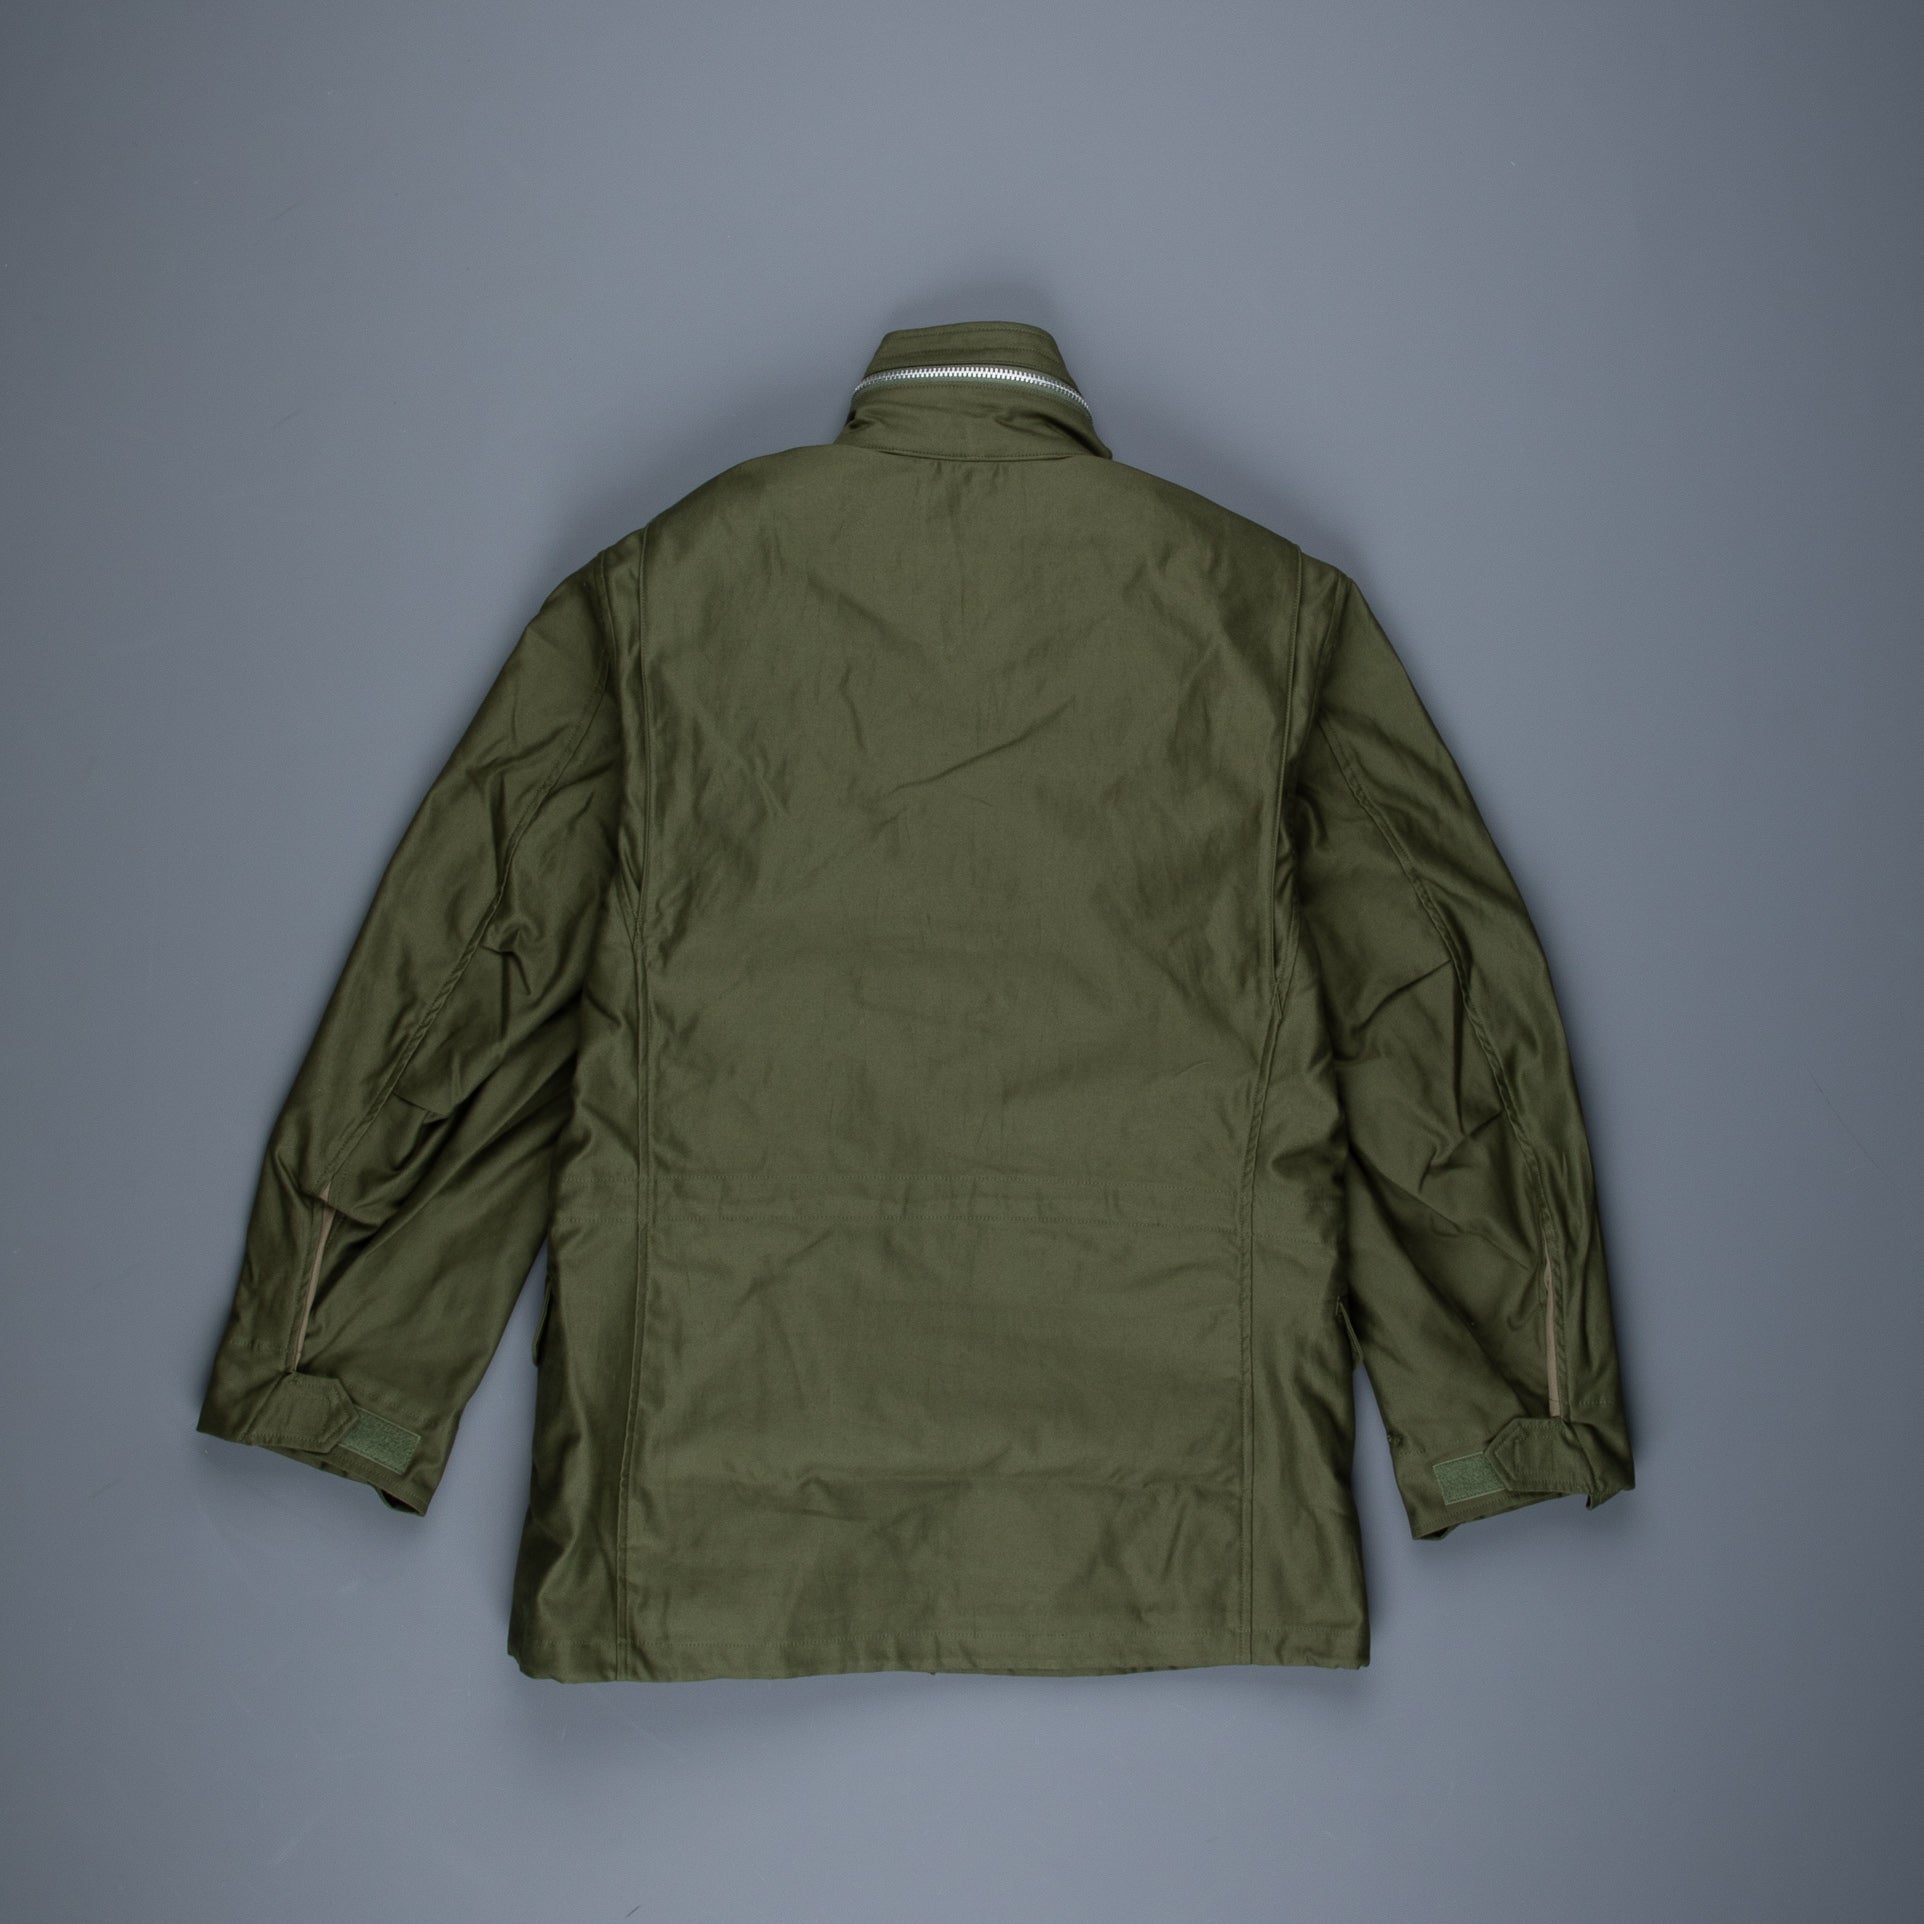 M-65 Jacket Army Green back